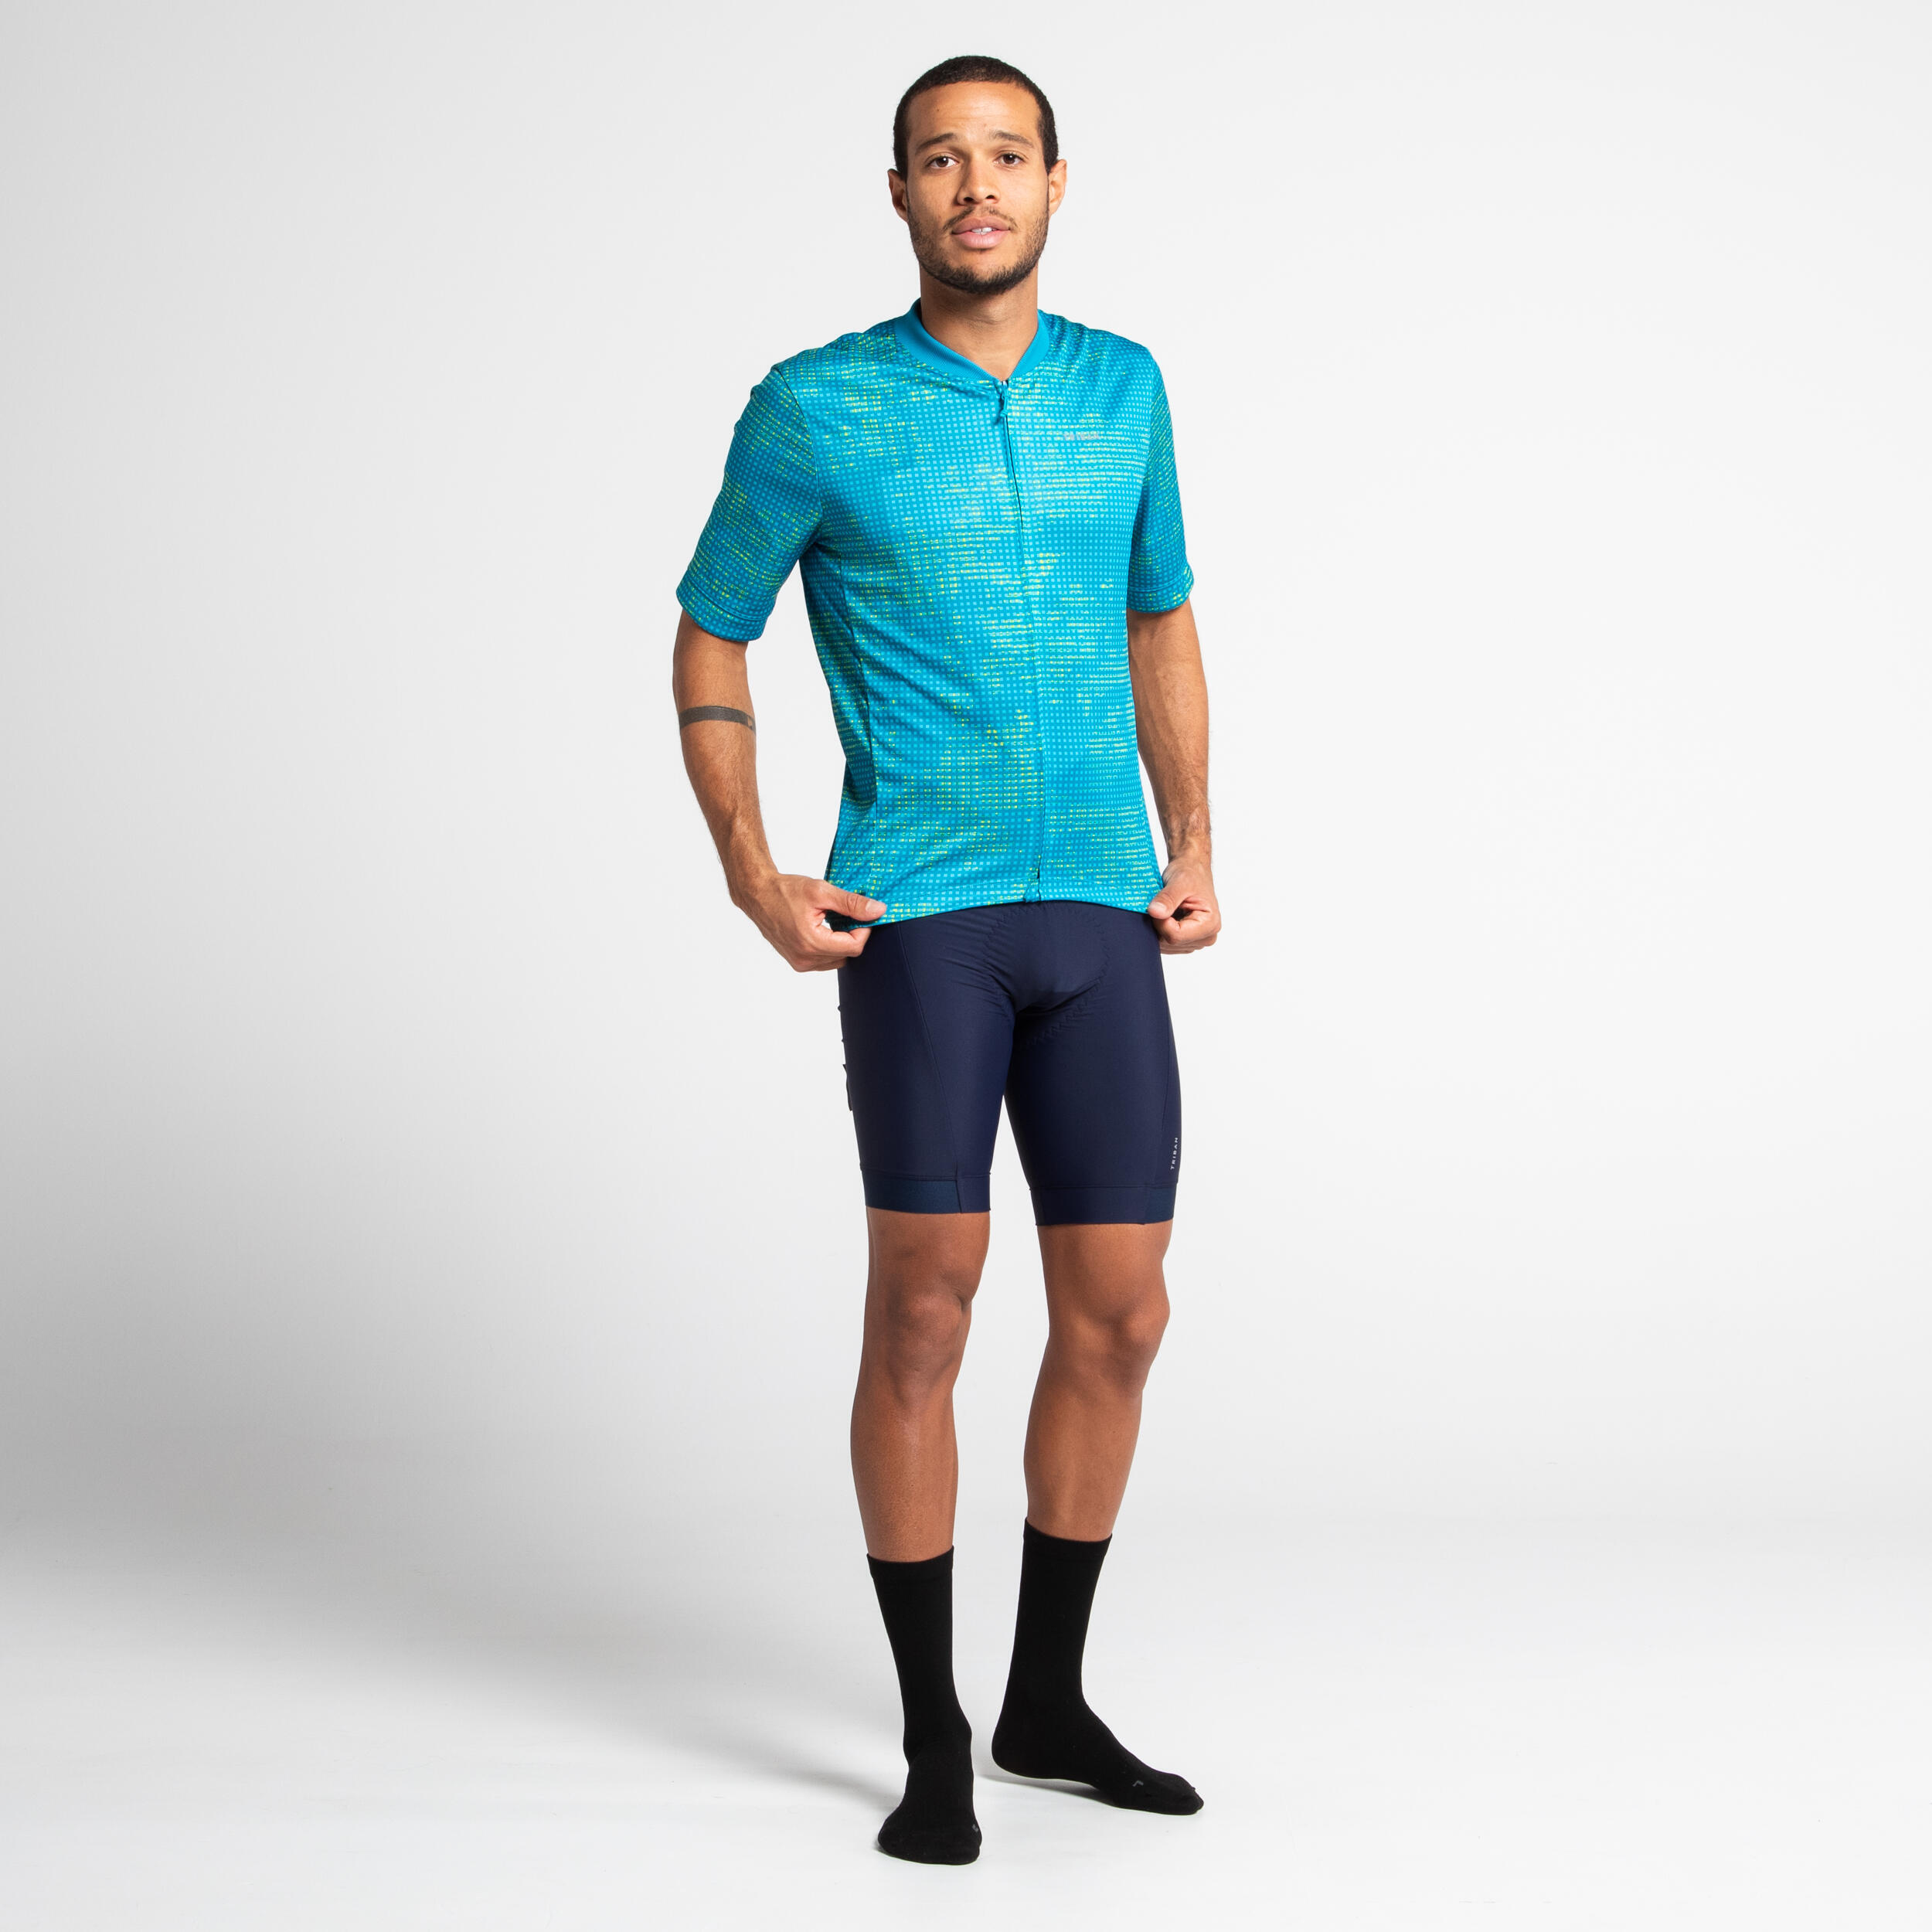 Men's Short-Sleeved Road Cycling Summer Jersey RC100 - Turquoise 2/7